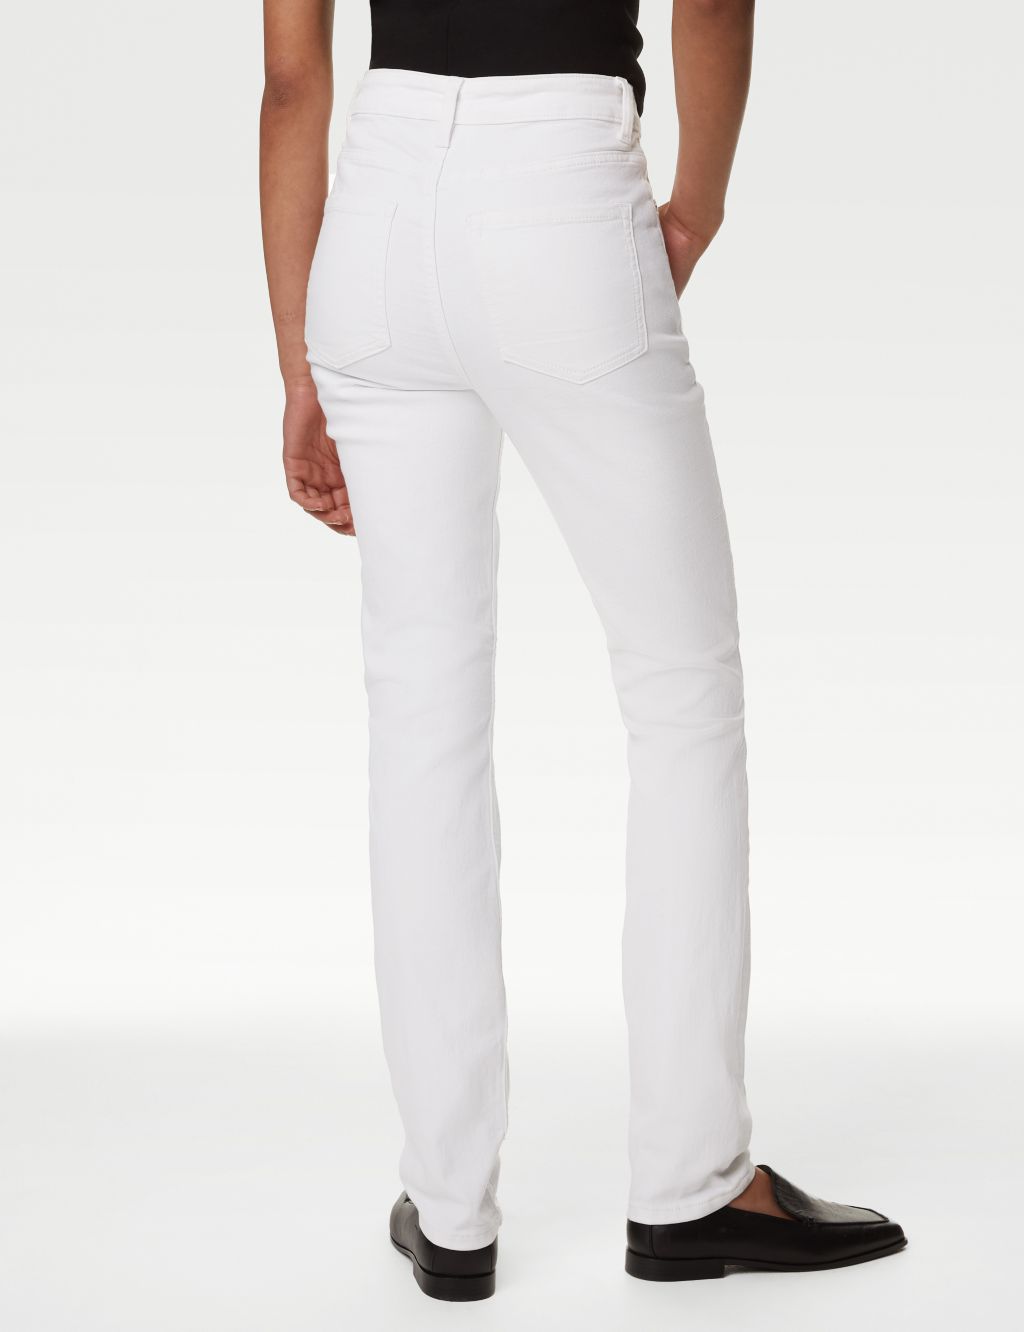 Lily Slim Fit Jeans with Stretch image 4